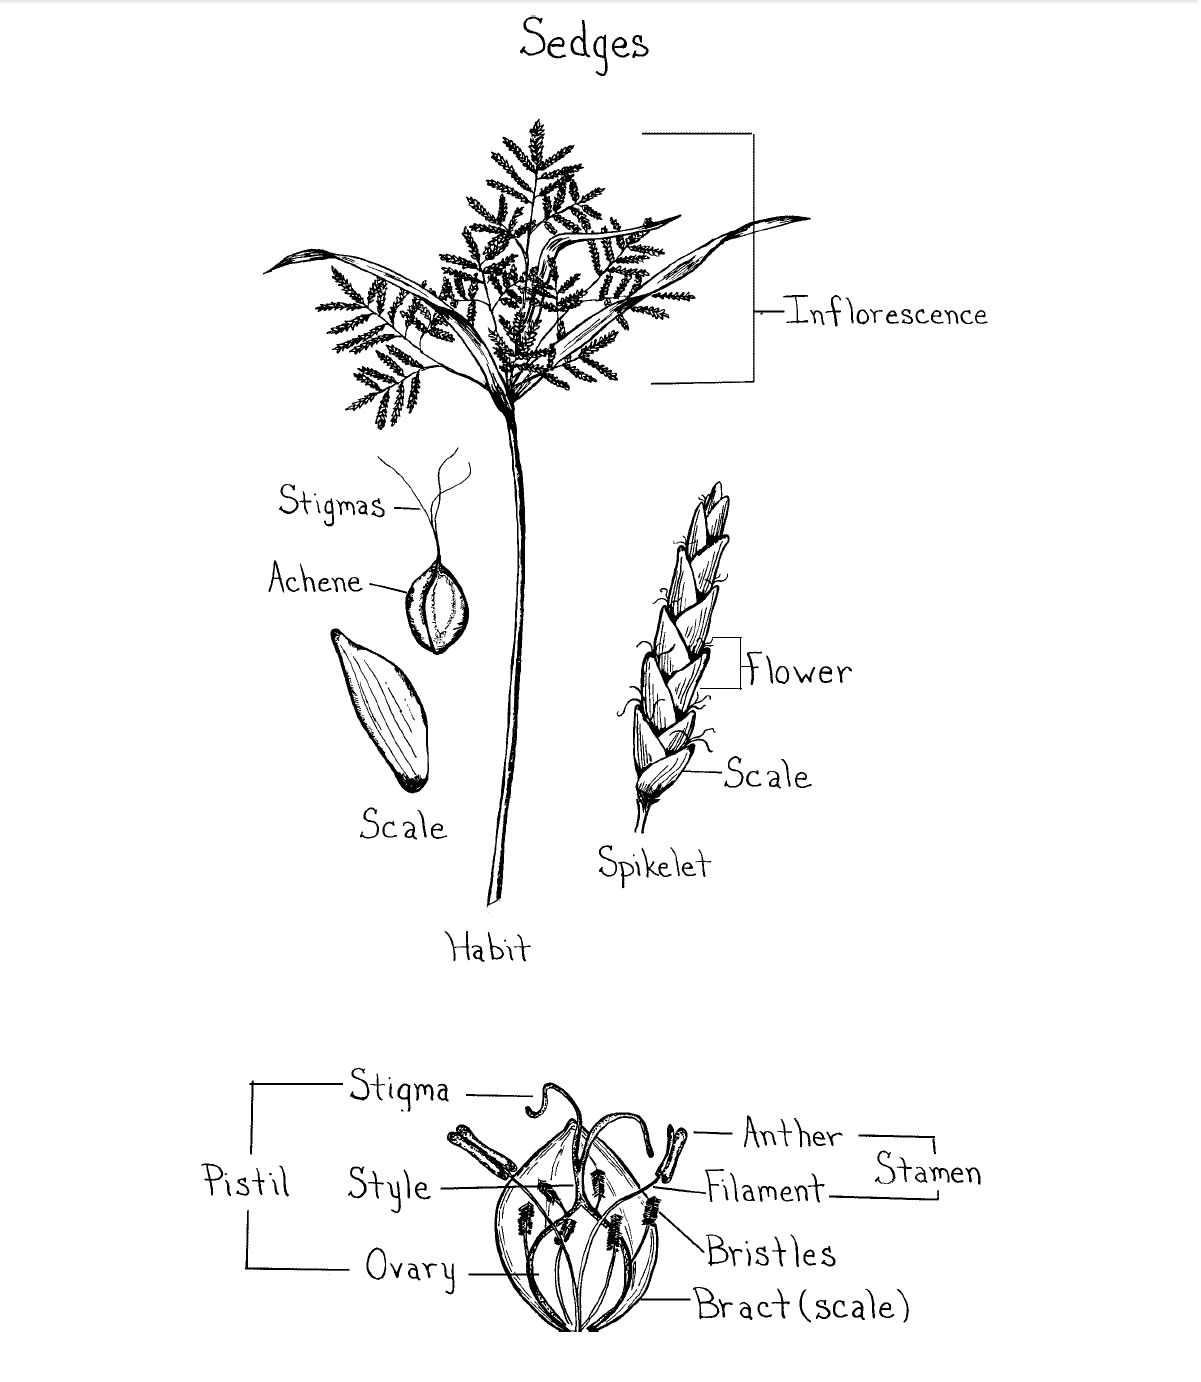 Figure 3. Sedge Floral Parts (Credit: Norman Melvin, USDA Cold Region Research and Engineering Laboratory).